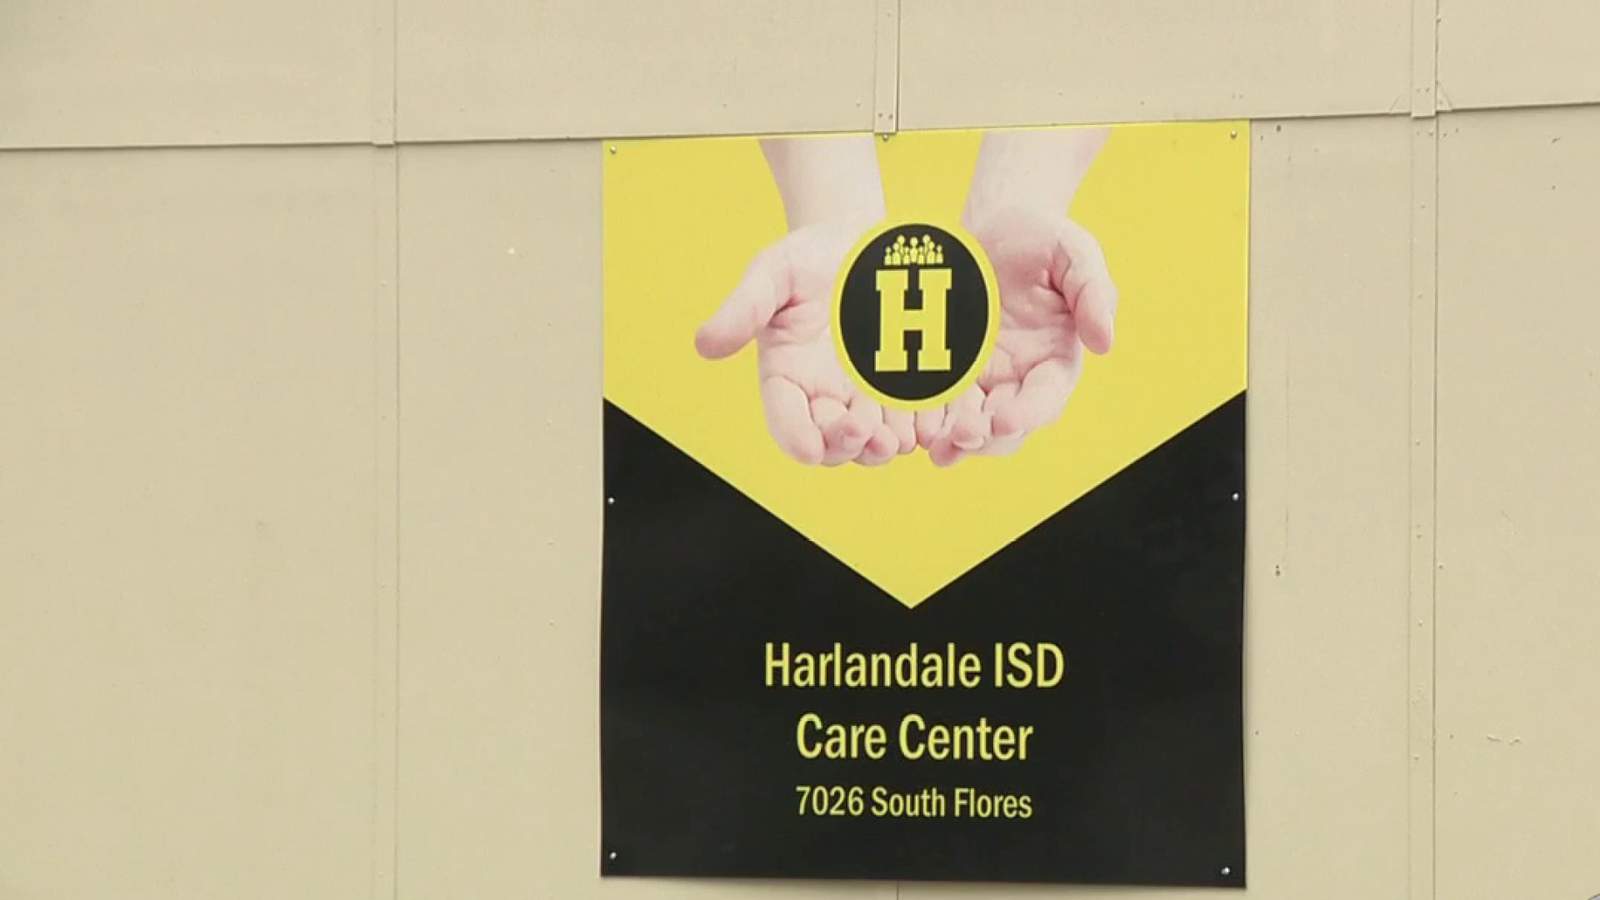 Harlandale ISD Care Center opens